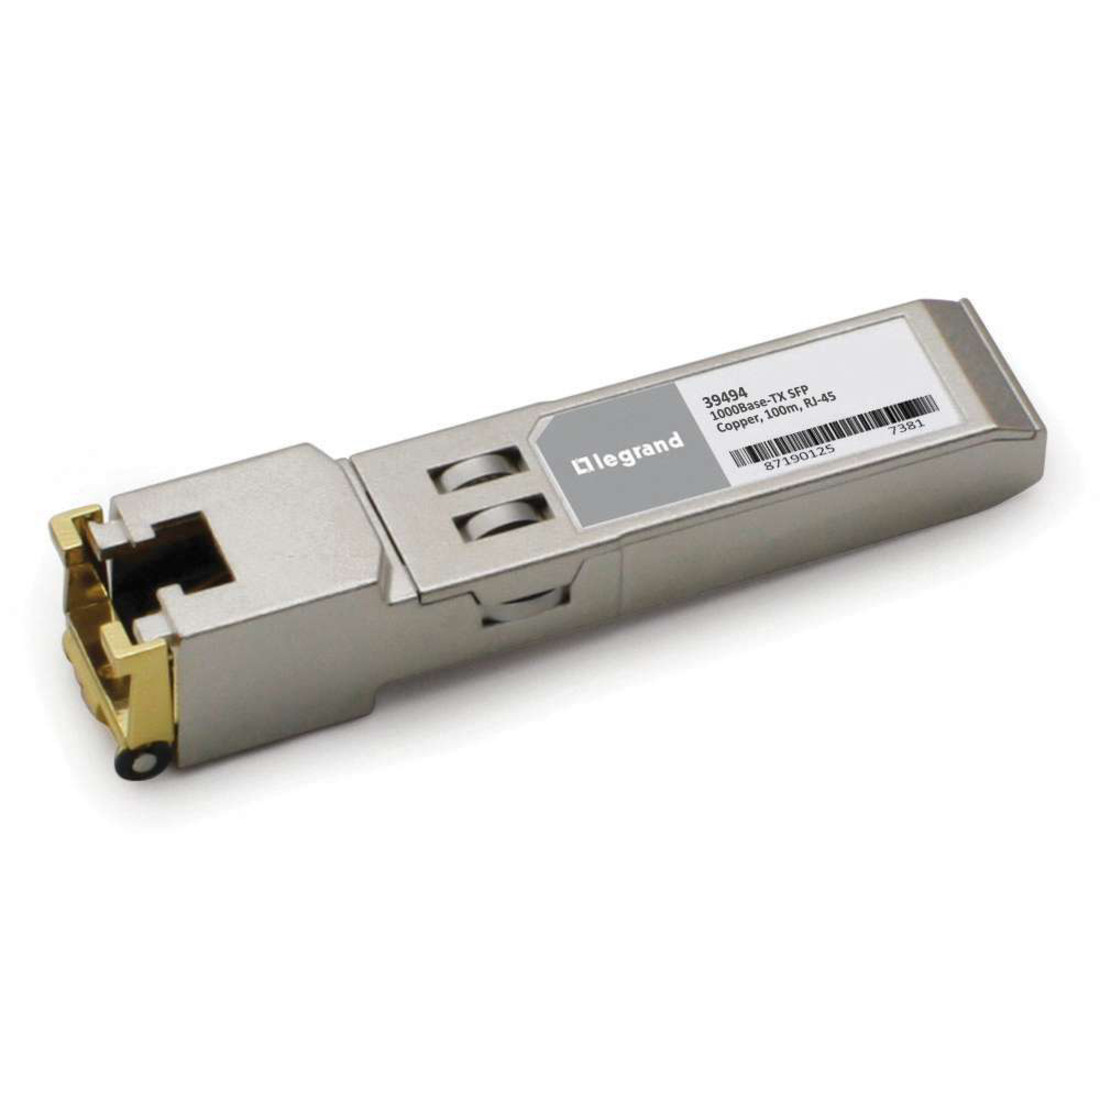 C2G HP 453154-B21 Compatible 1000Base-TX Copper SFP (mini-GBIC) Transceiver ModuleFor Data Networking1000Base-TXTwisted PairGigabit Ether… 39494